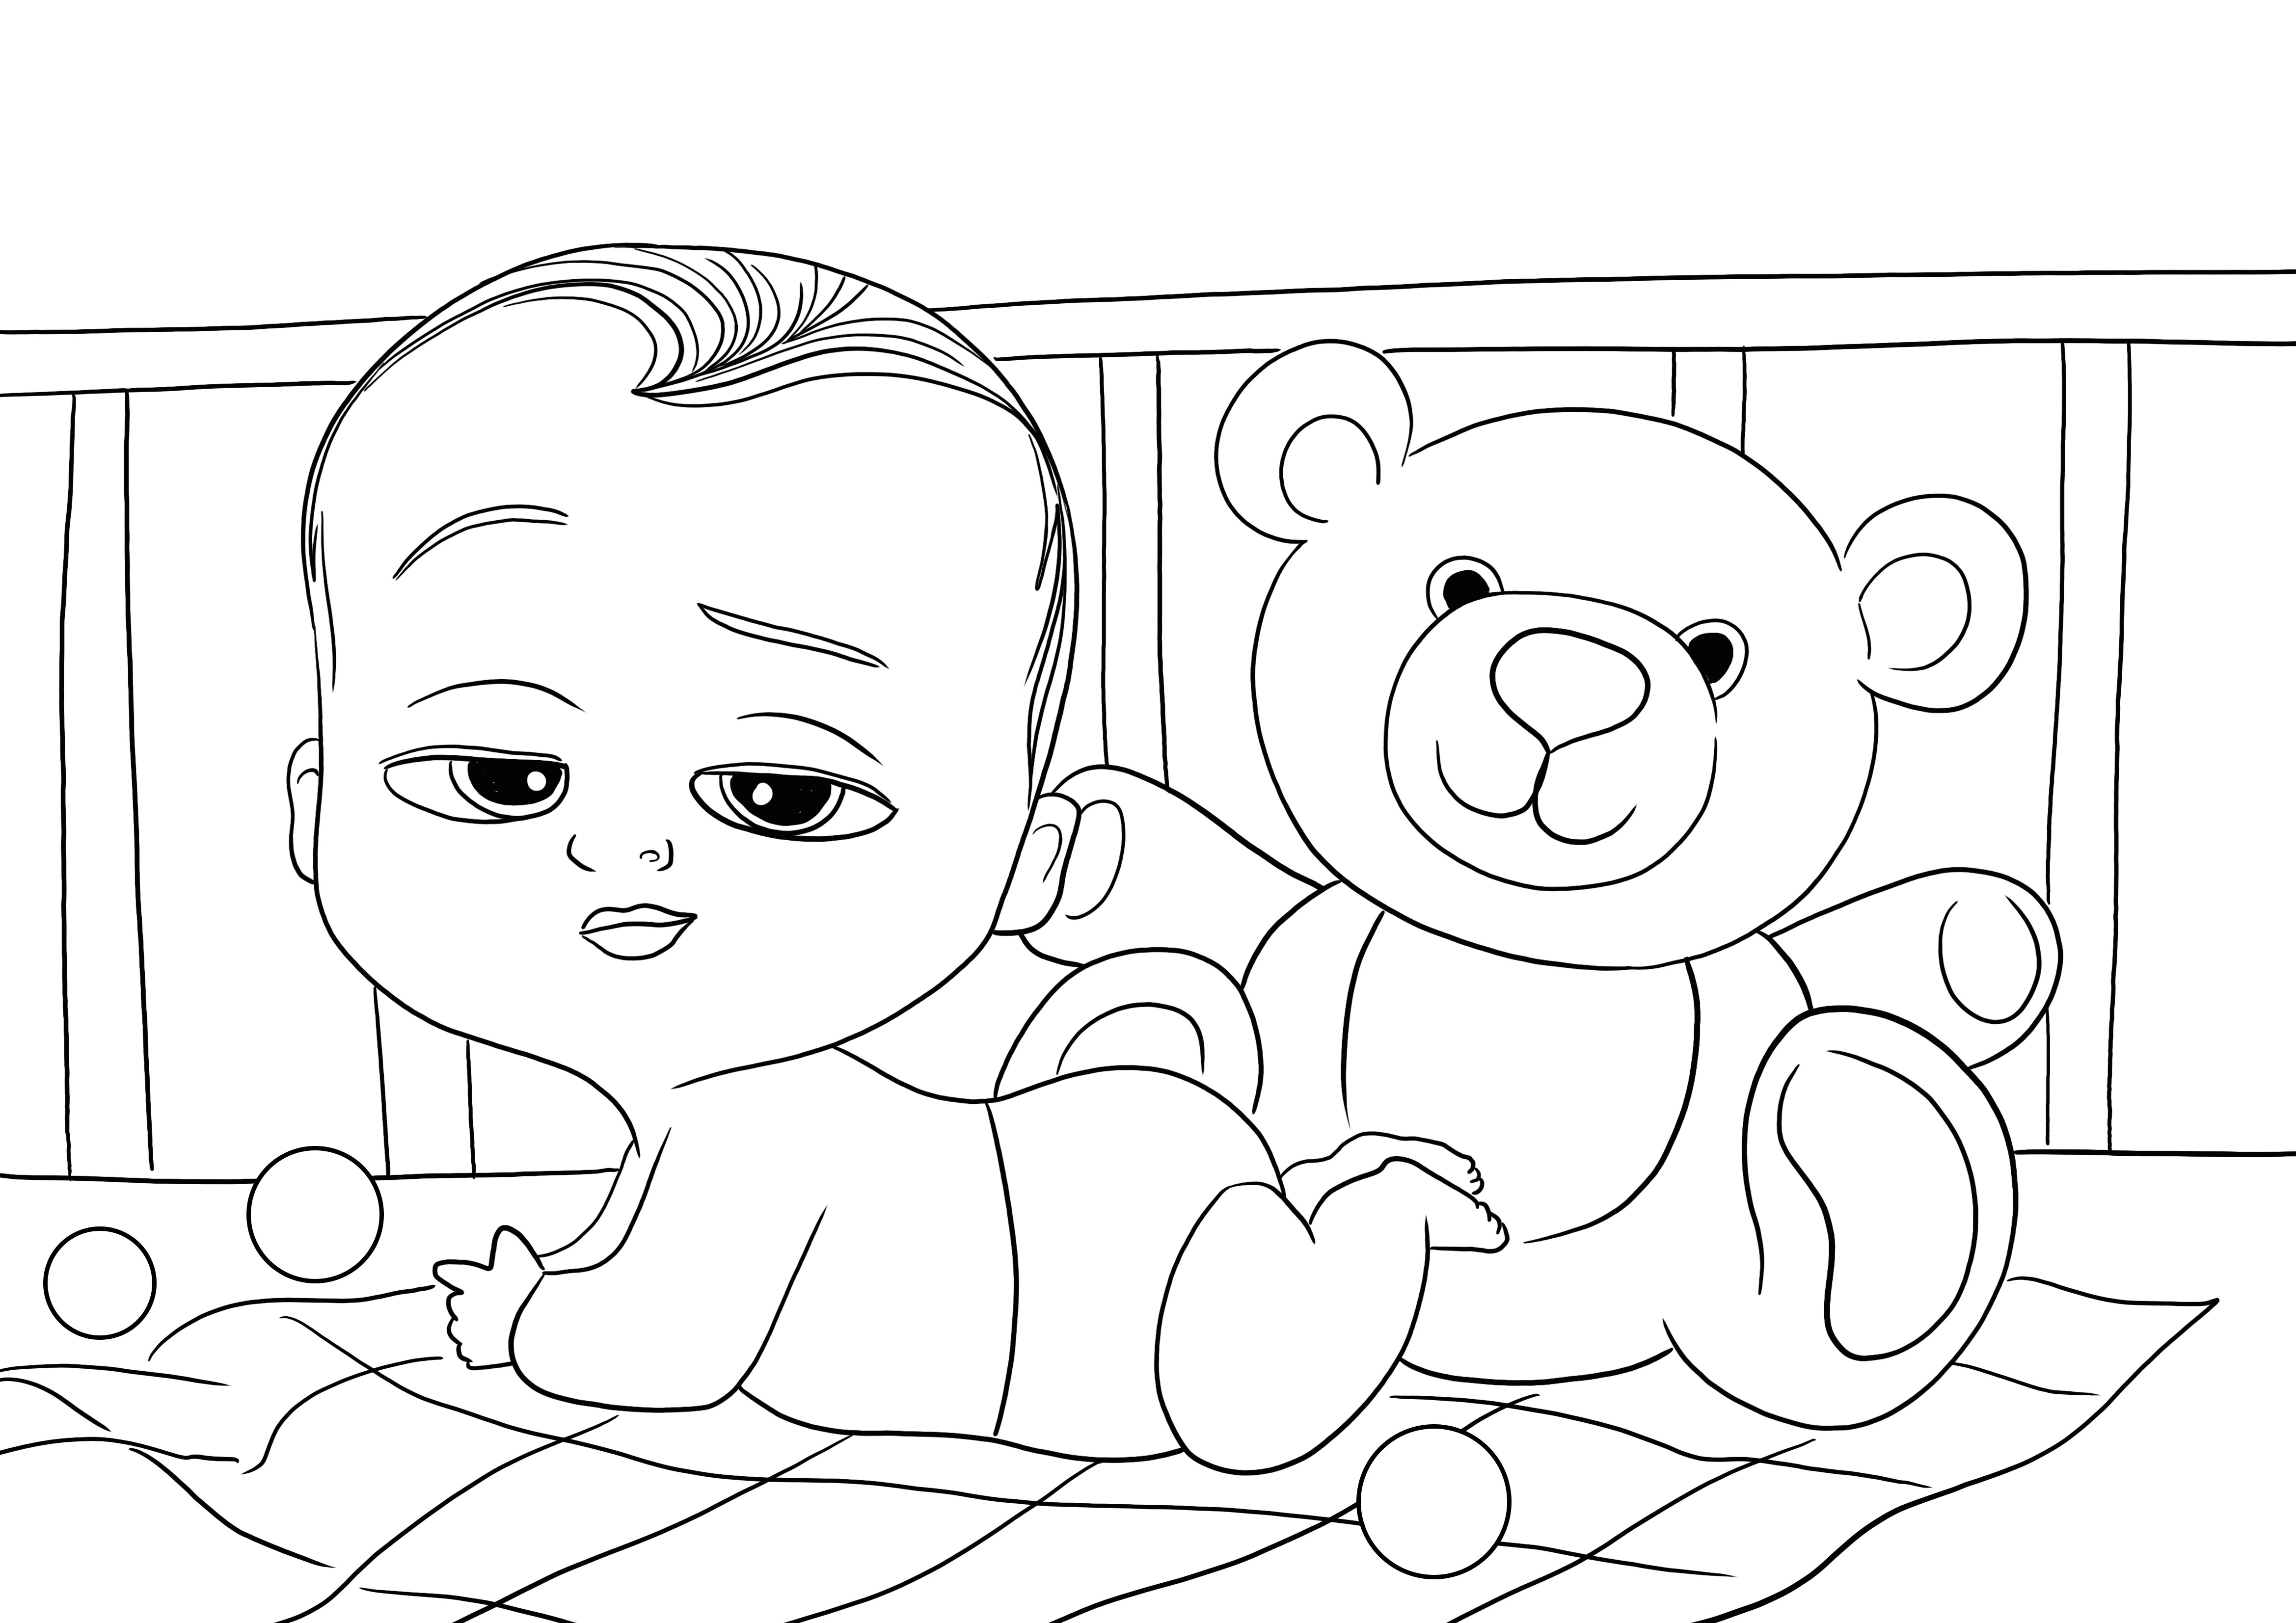 Free to download coloring image of Baby Boss and Teddy Bear to color